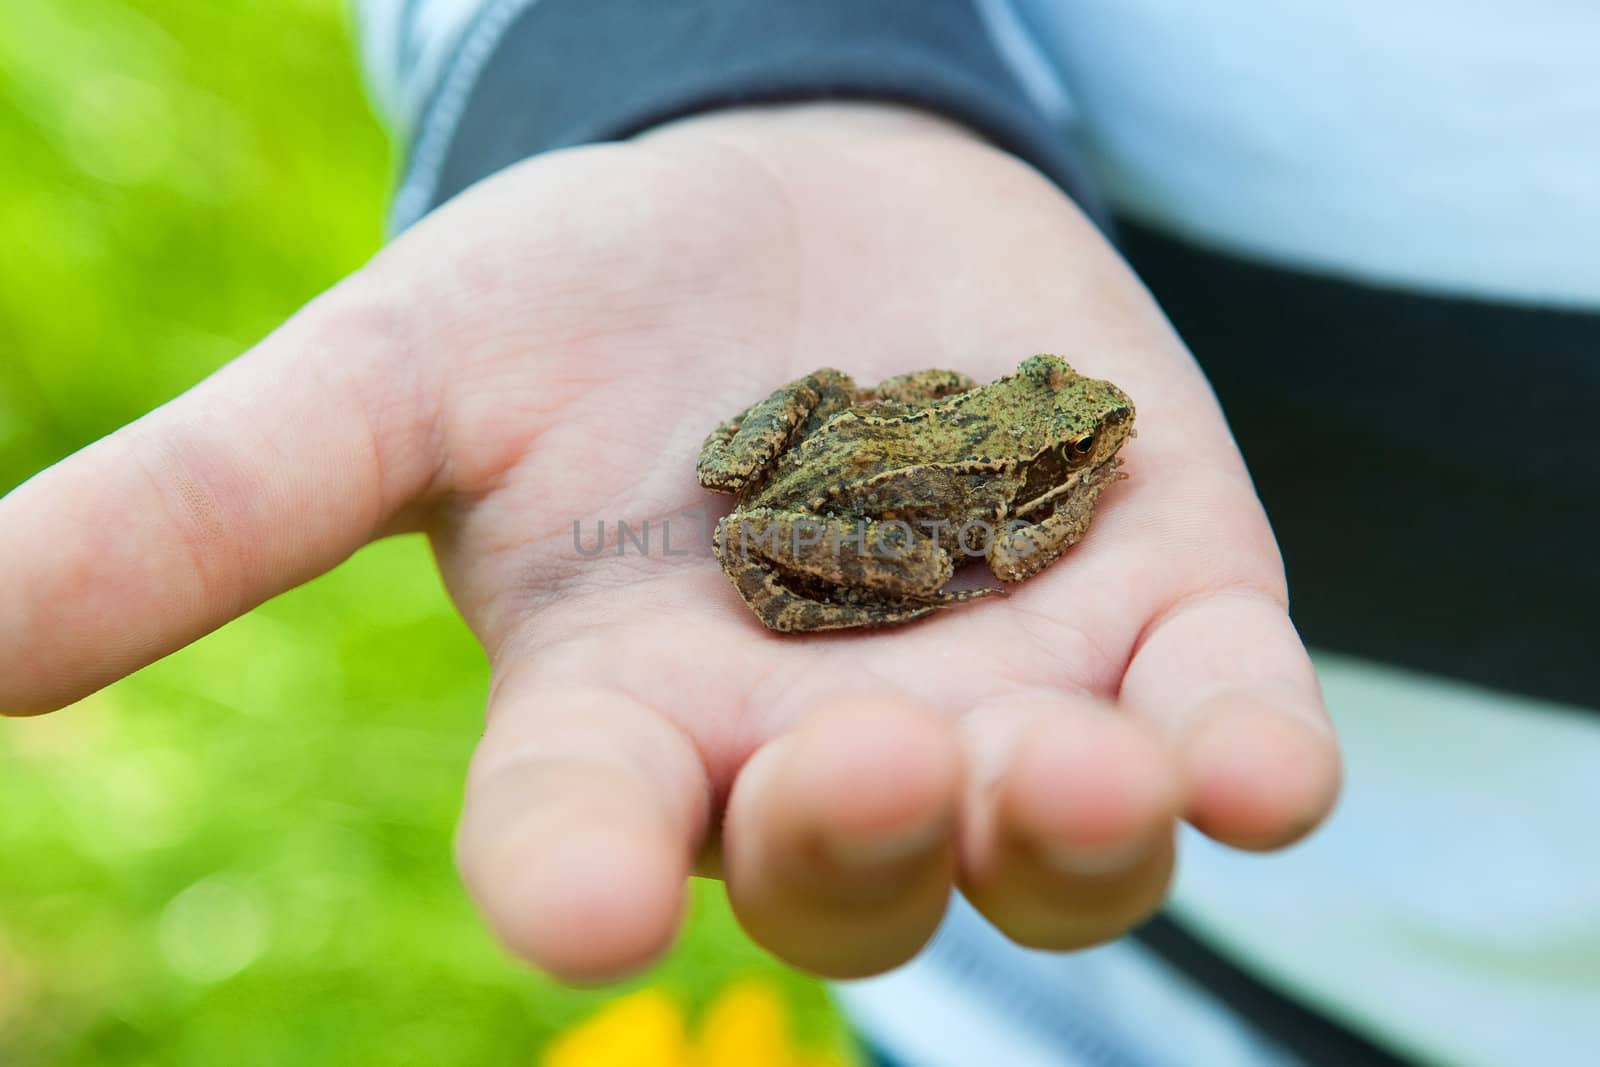 A frog on the hand